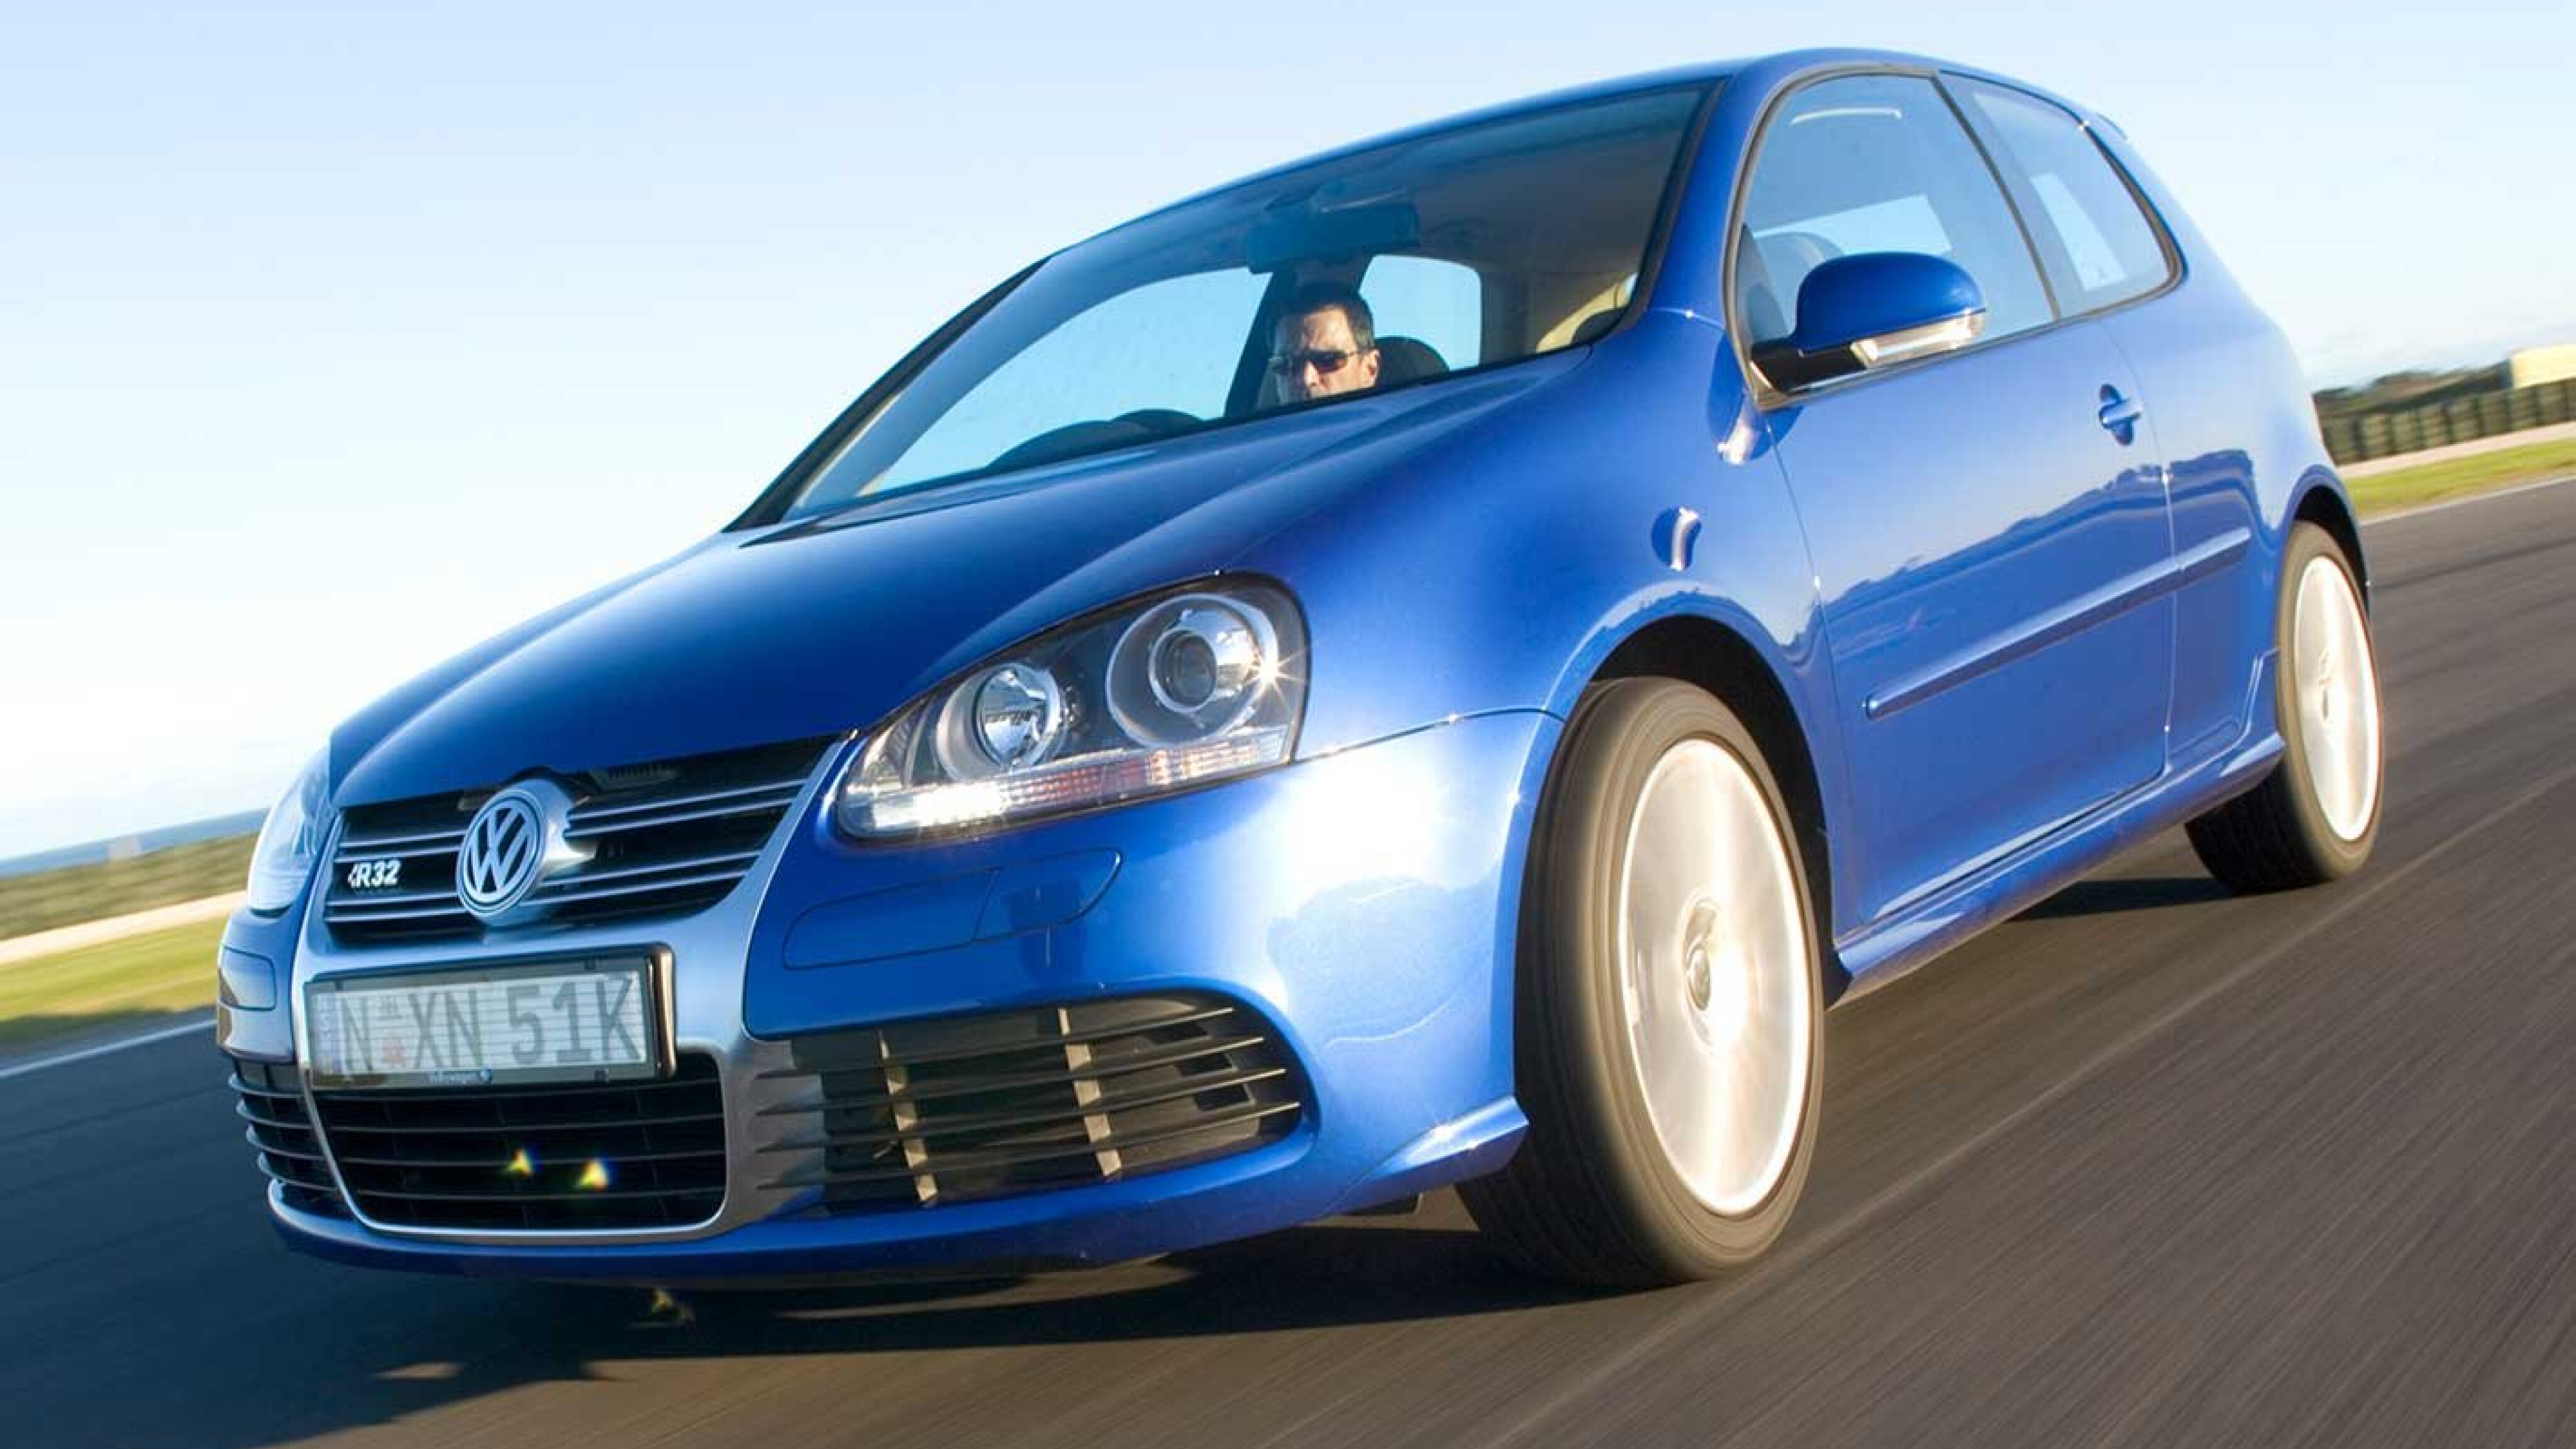 Everything You Need To Know About The Iconic 2004 VW R32